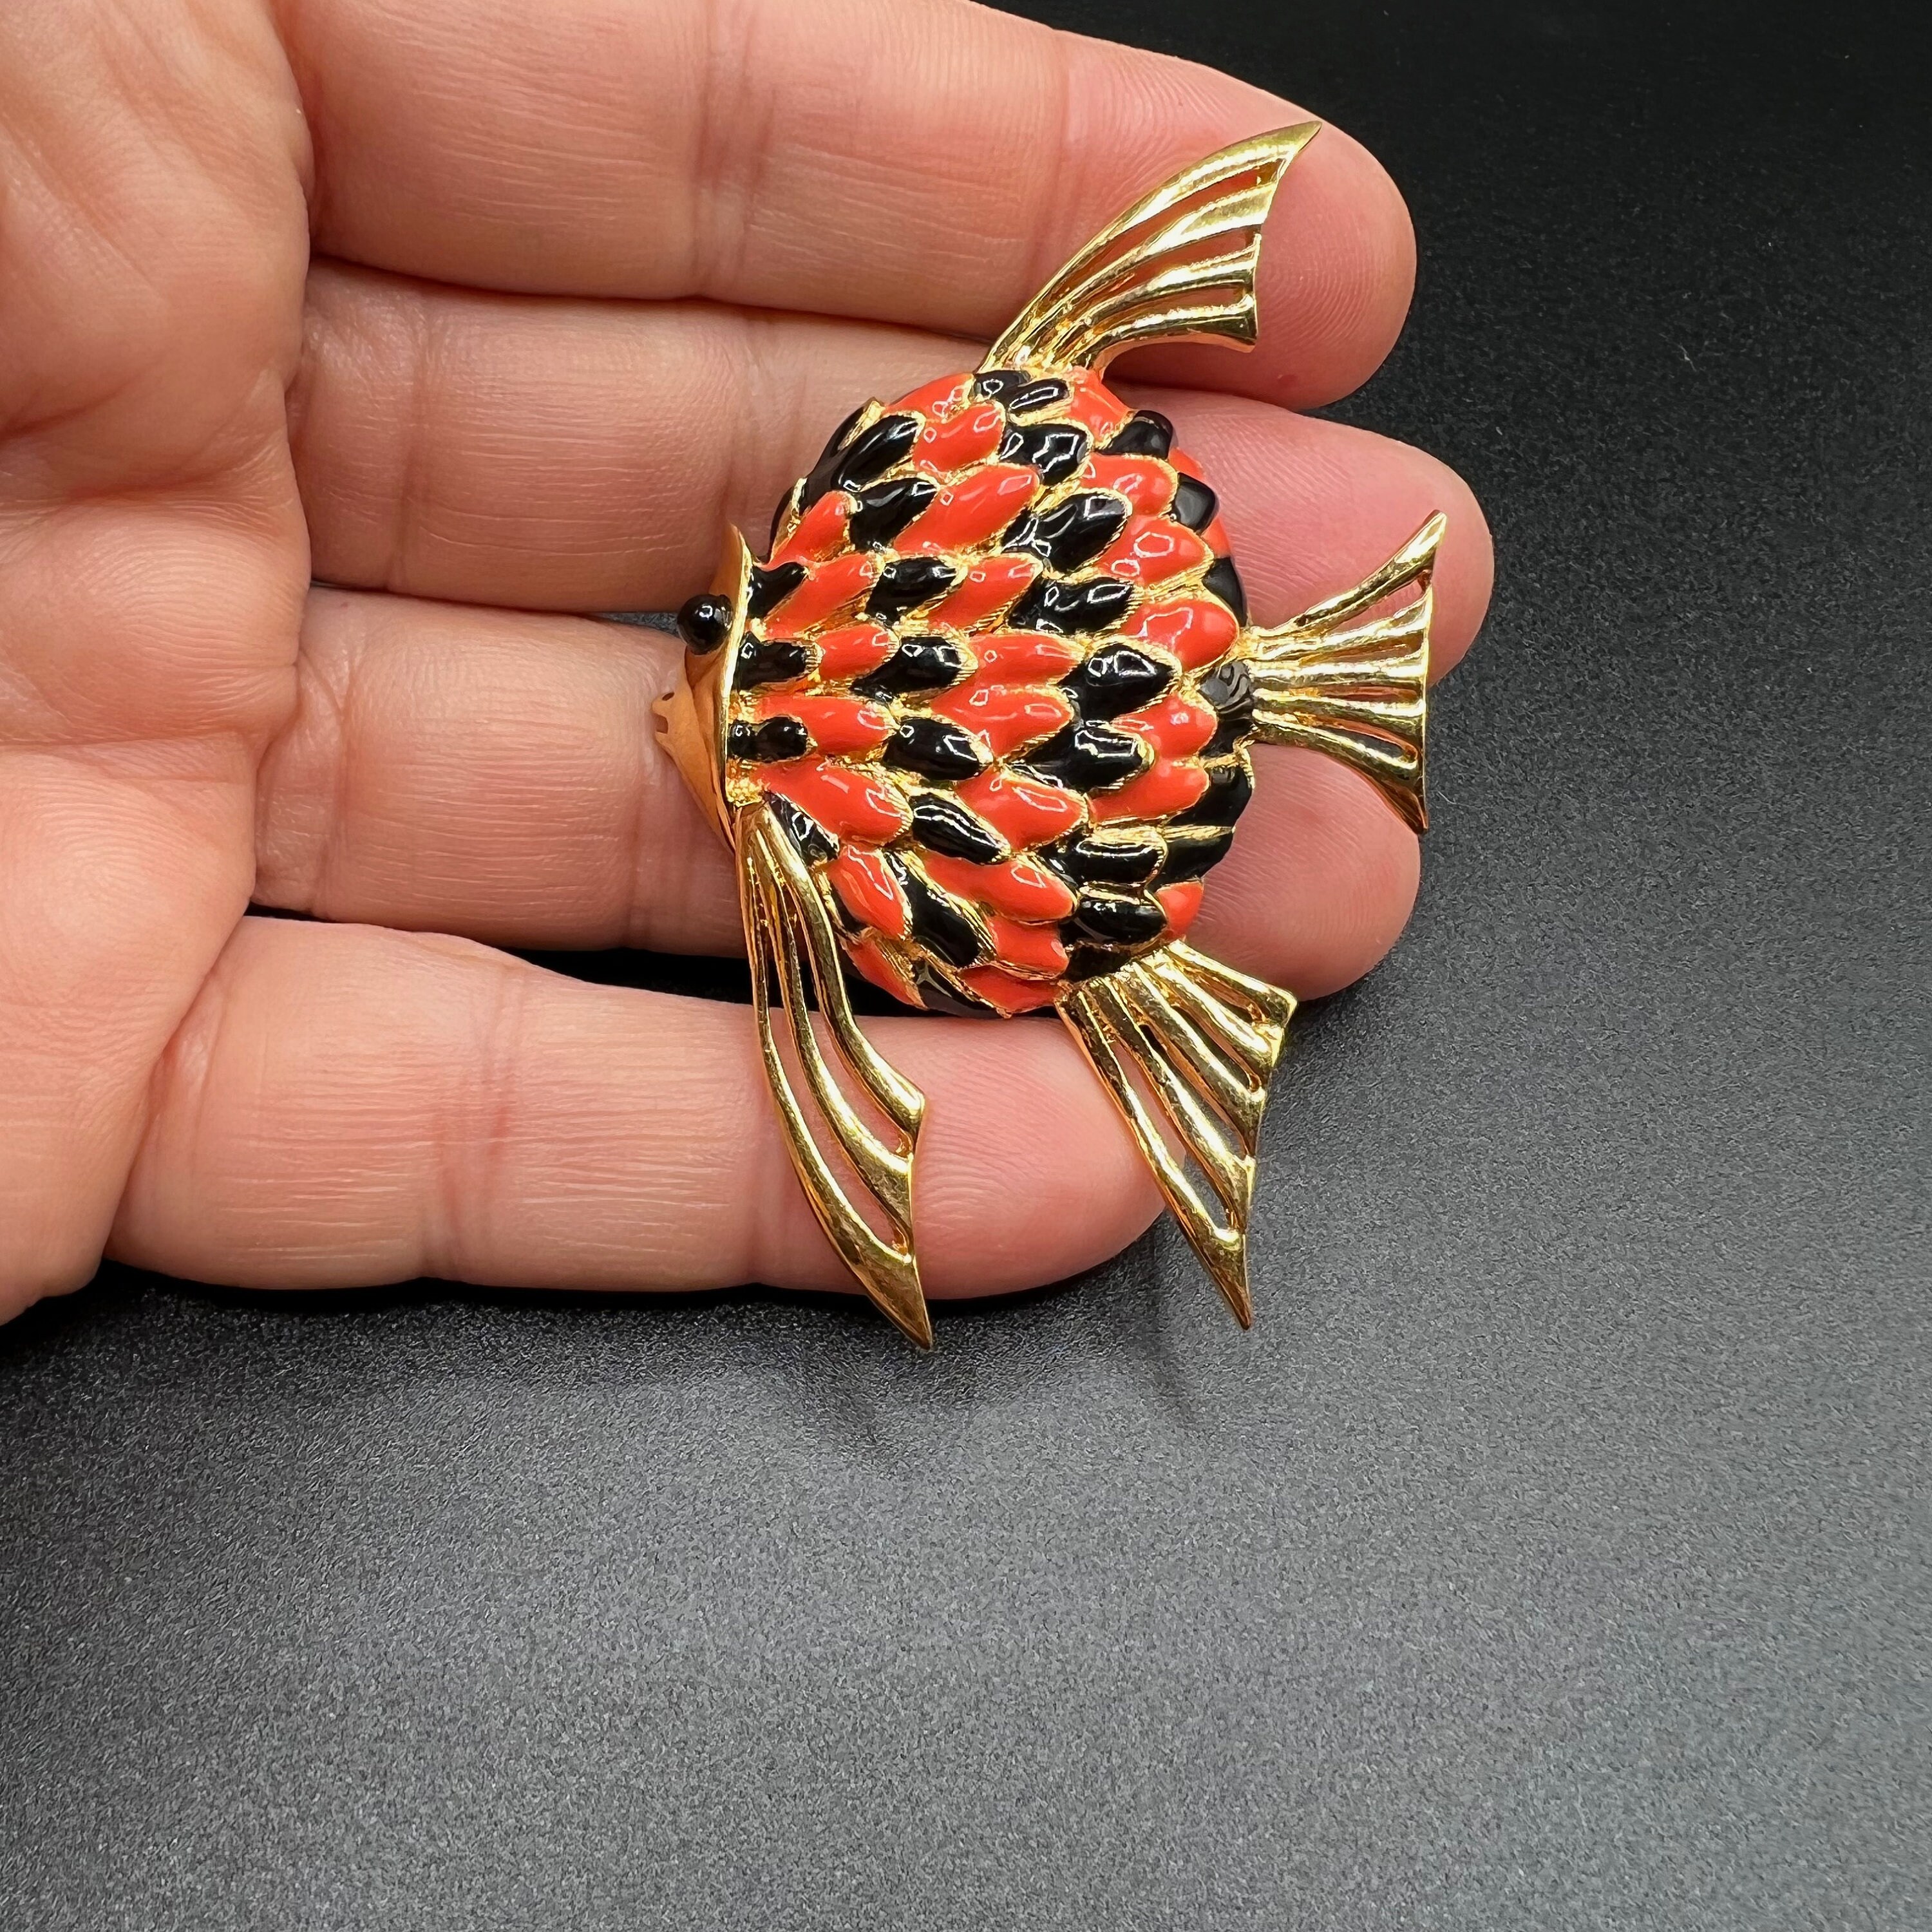 Gold and Enamelled Tropical Fish Pin Coral and Black Scaled - Etsy